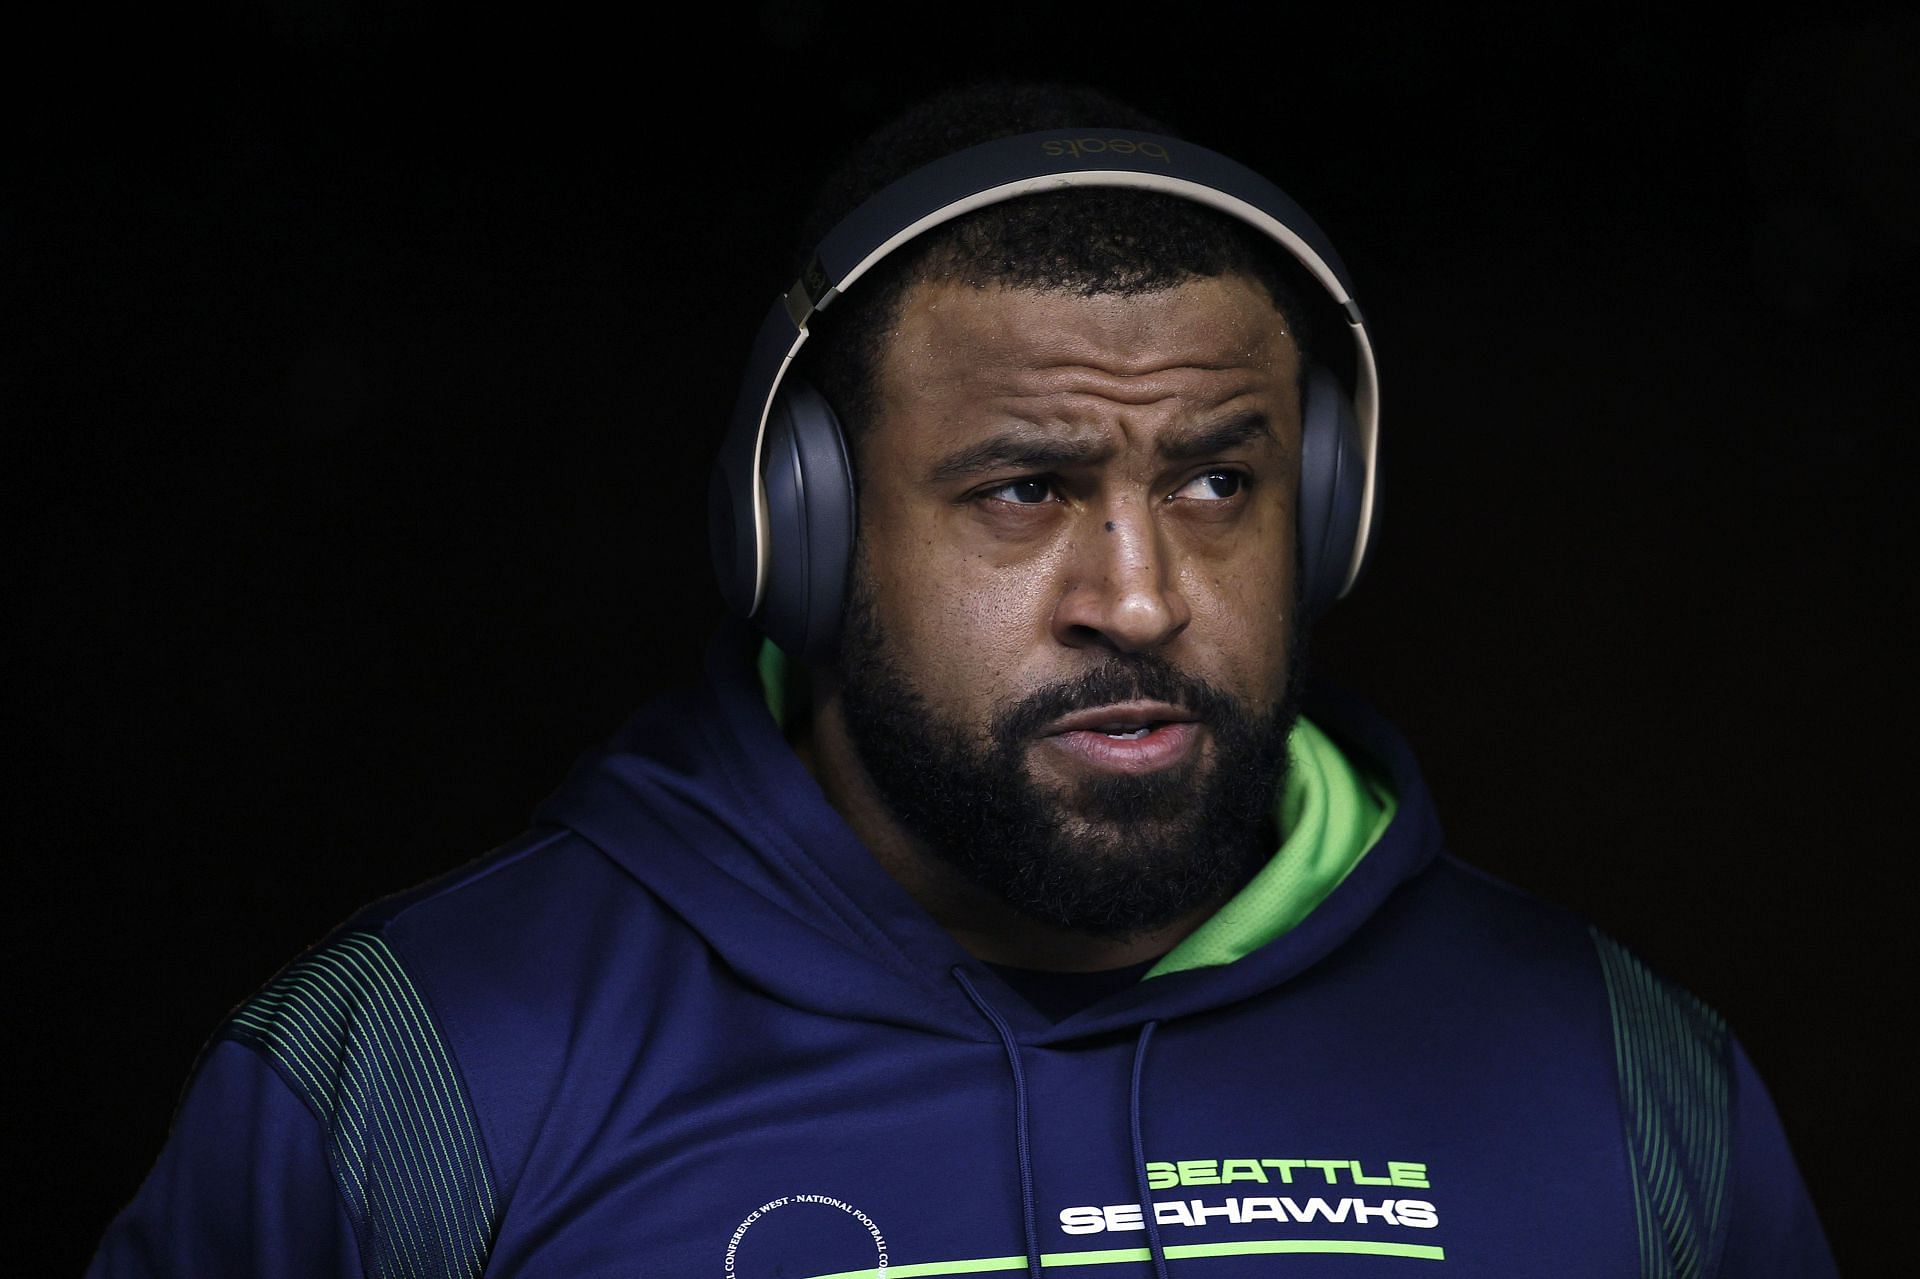 Seattle Seahawks offensive tackle Duane Brown